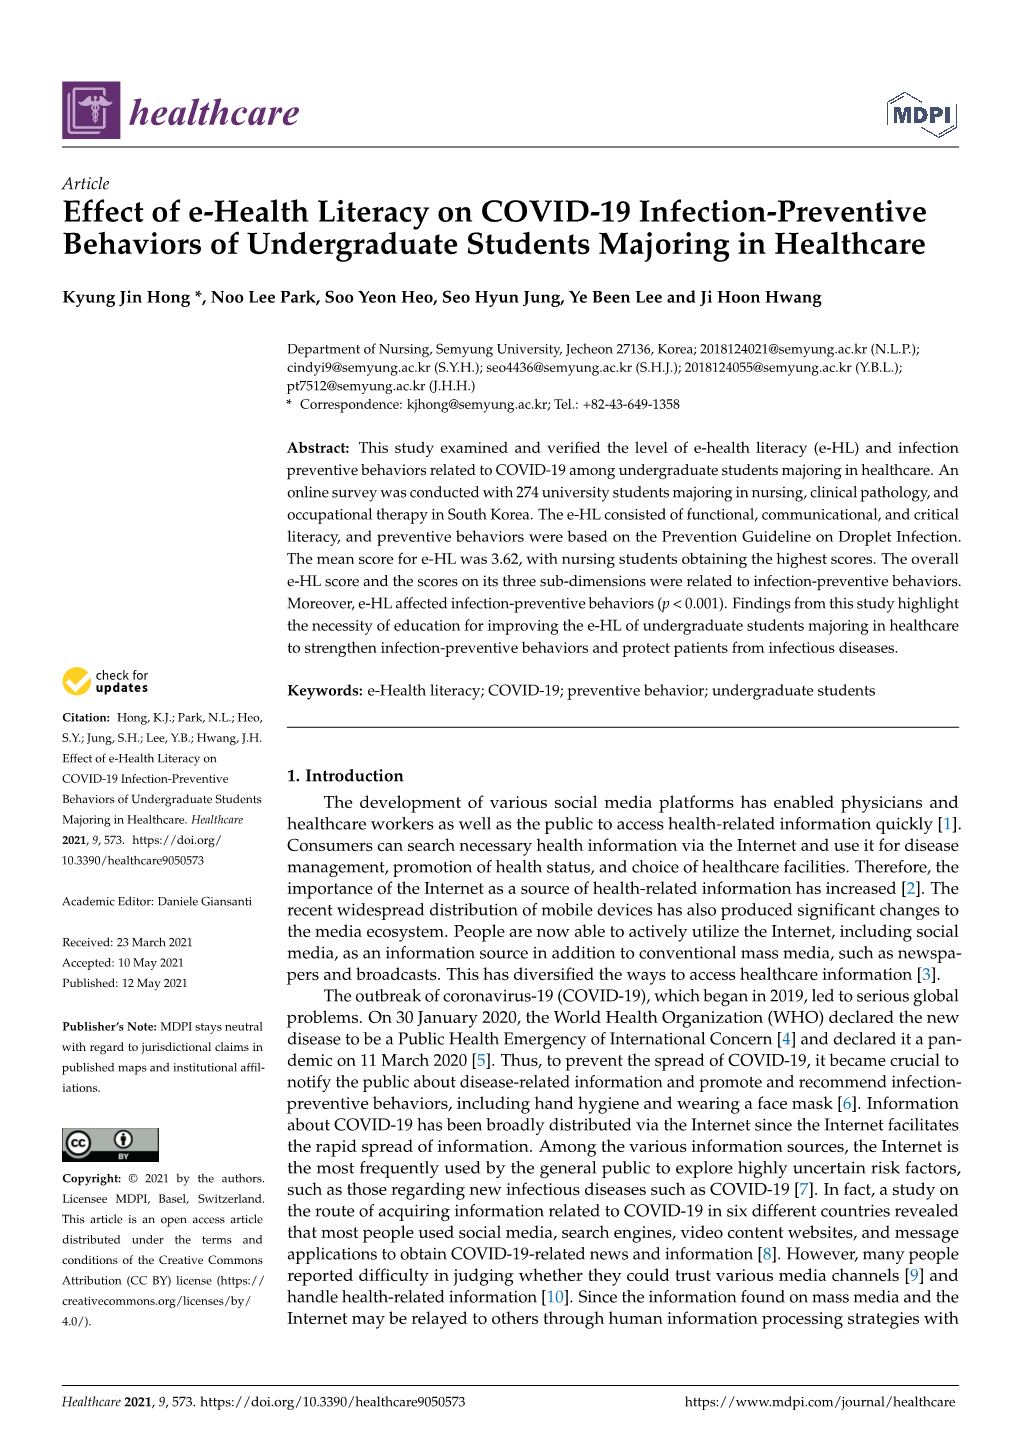 Effect of E-Health Literacy on COVID-19 Infection-Preventive Behaviors of Undergraduate Students Majoring in Healthcare